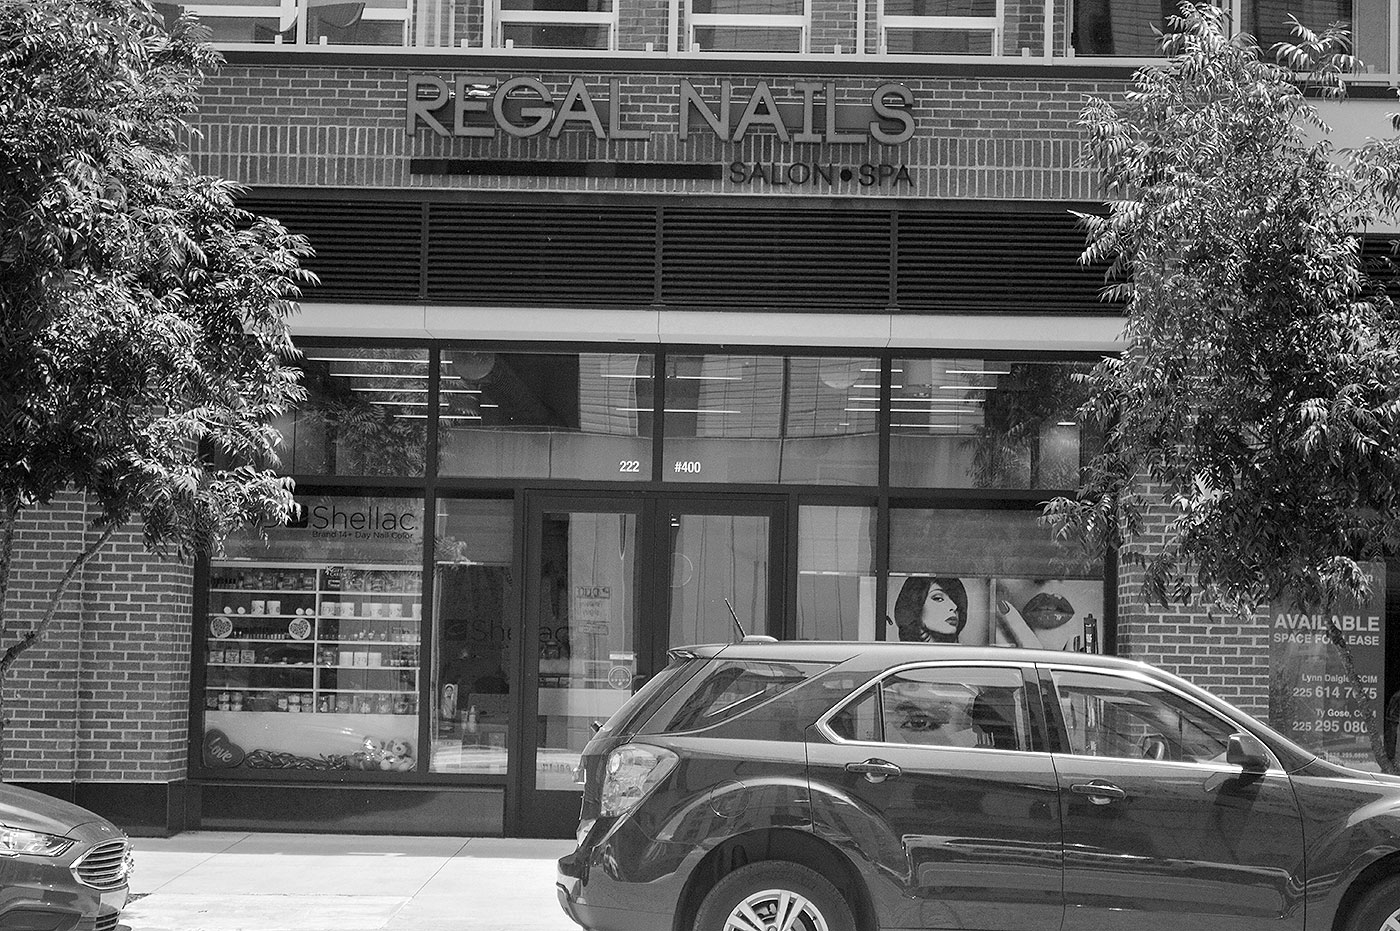 Black and white photo of the Regal Nails Store in Baton Rouge with a car parked in front.